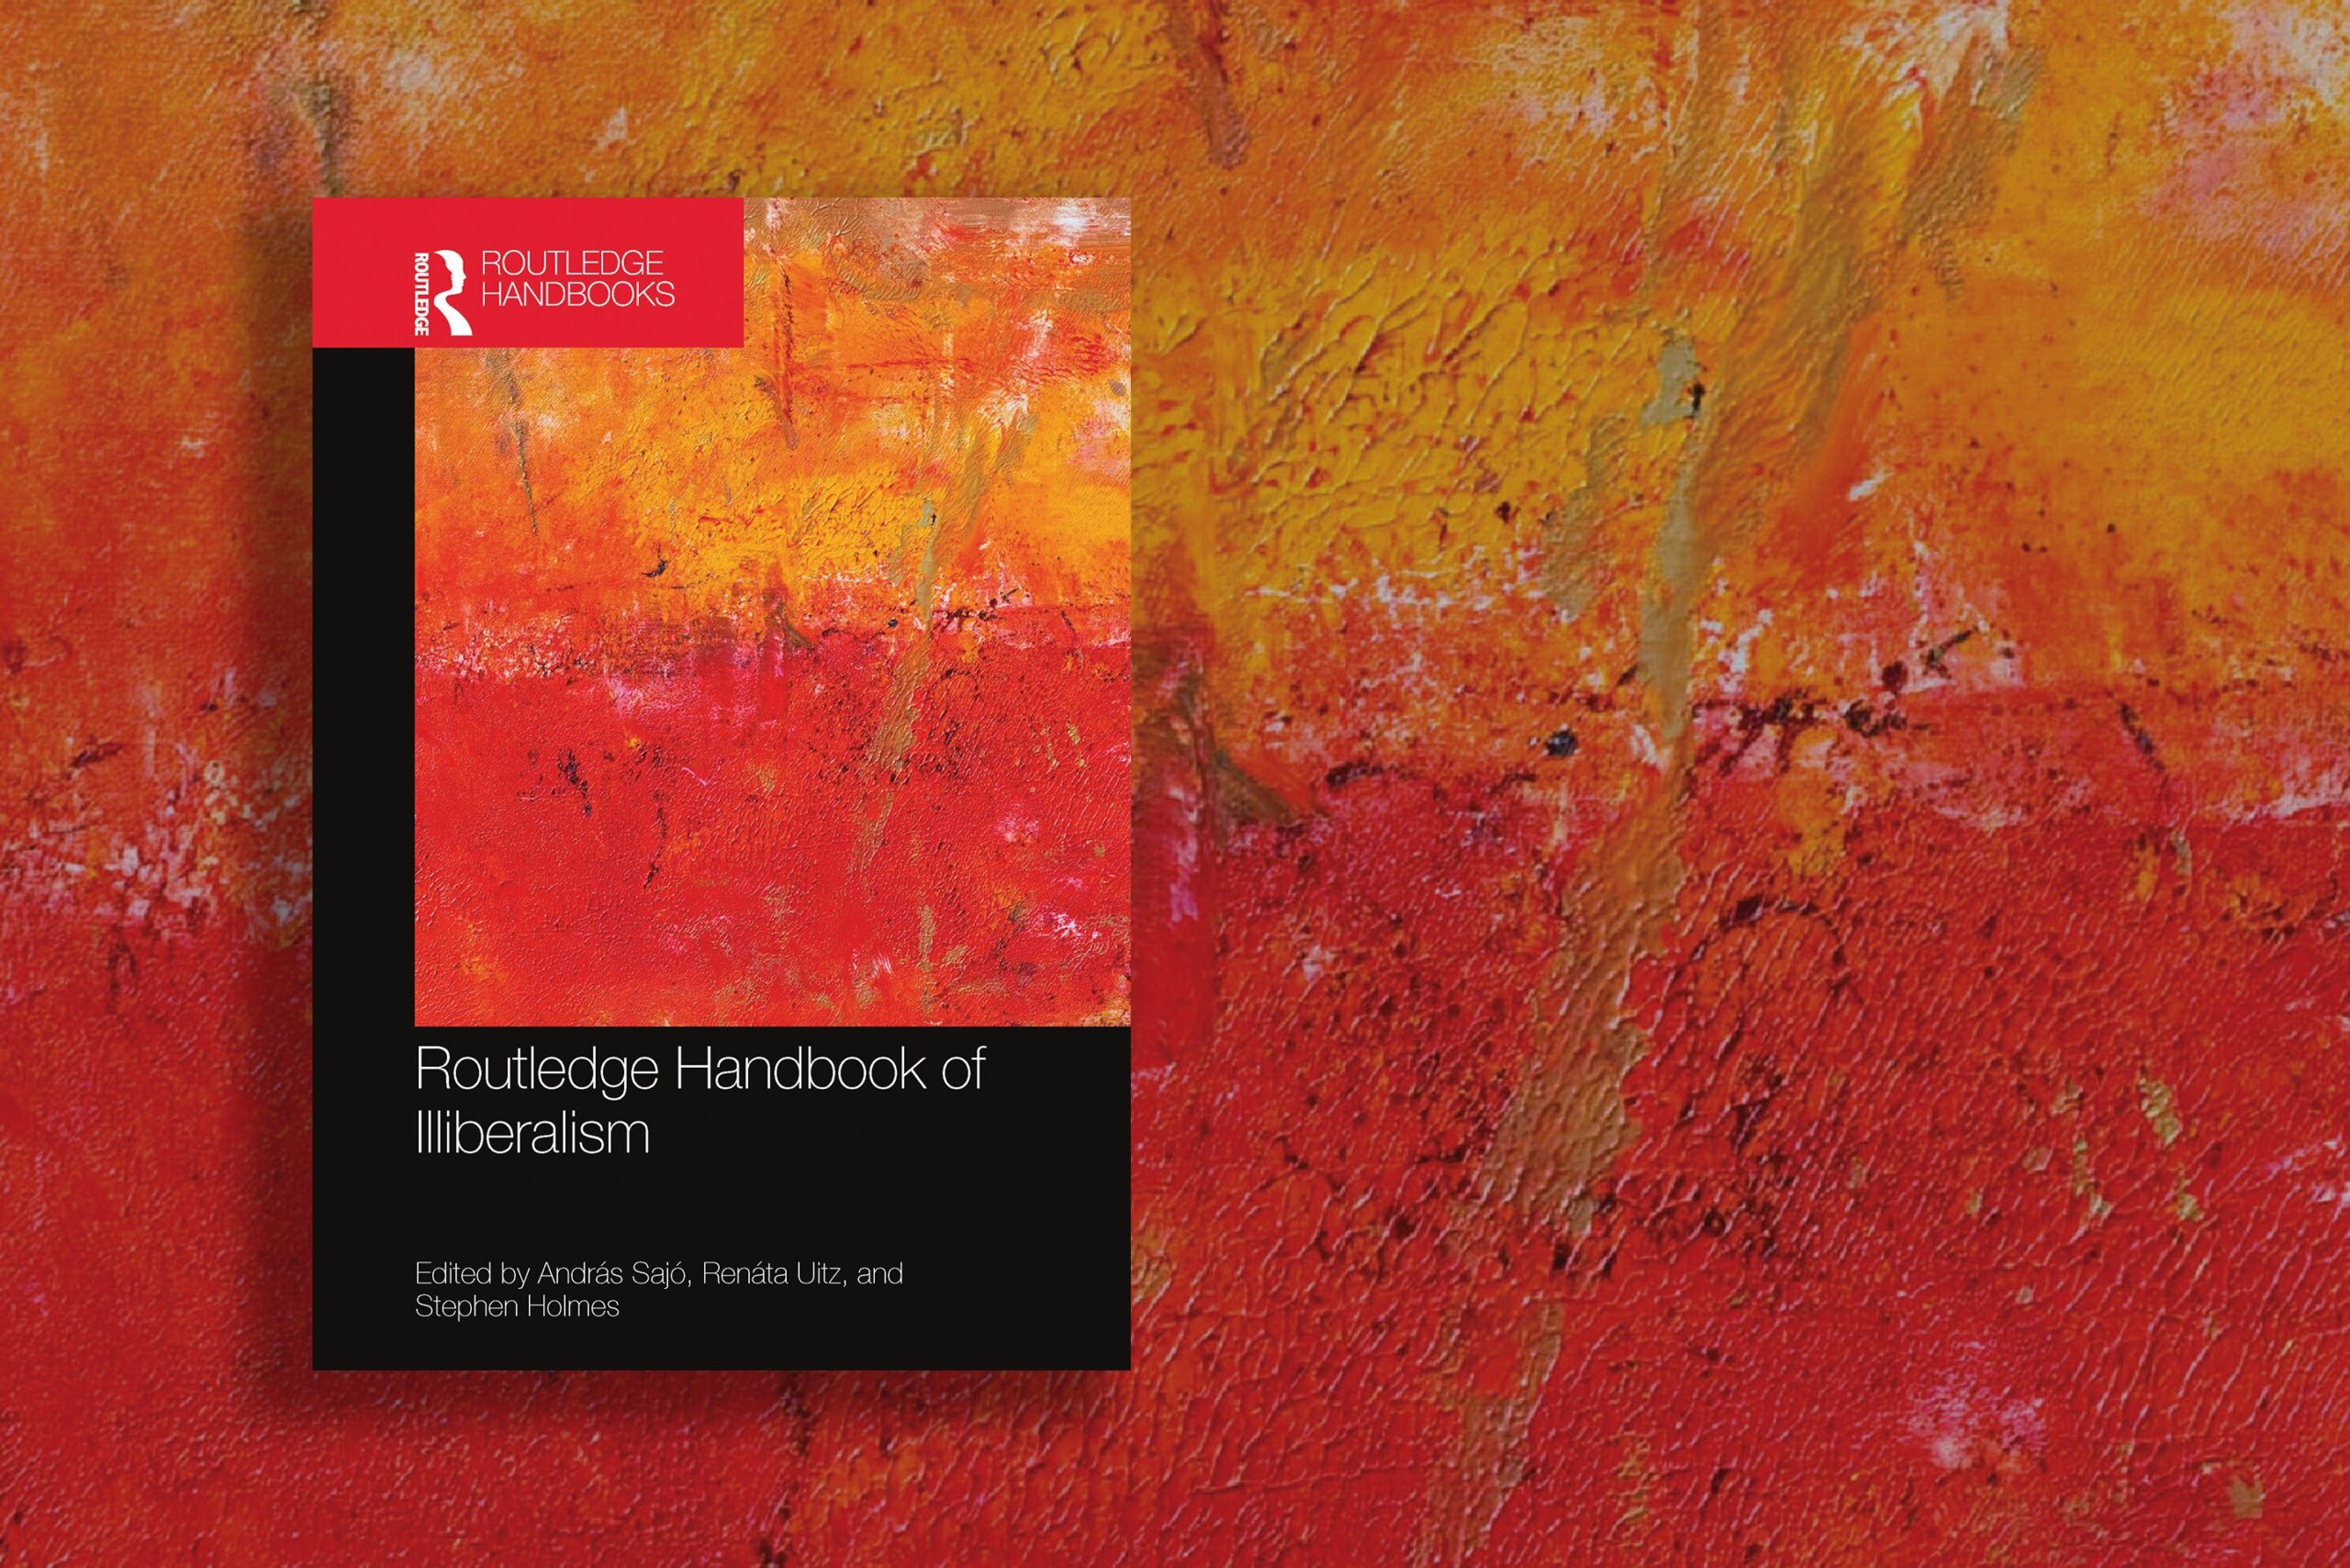 Book Review: Routledge Handbook of Illiberalism